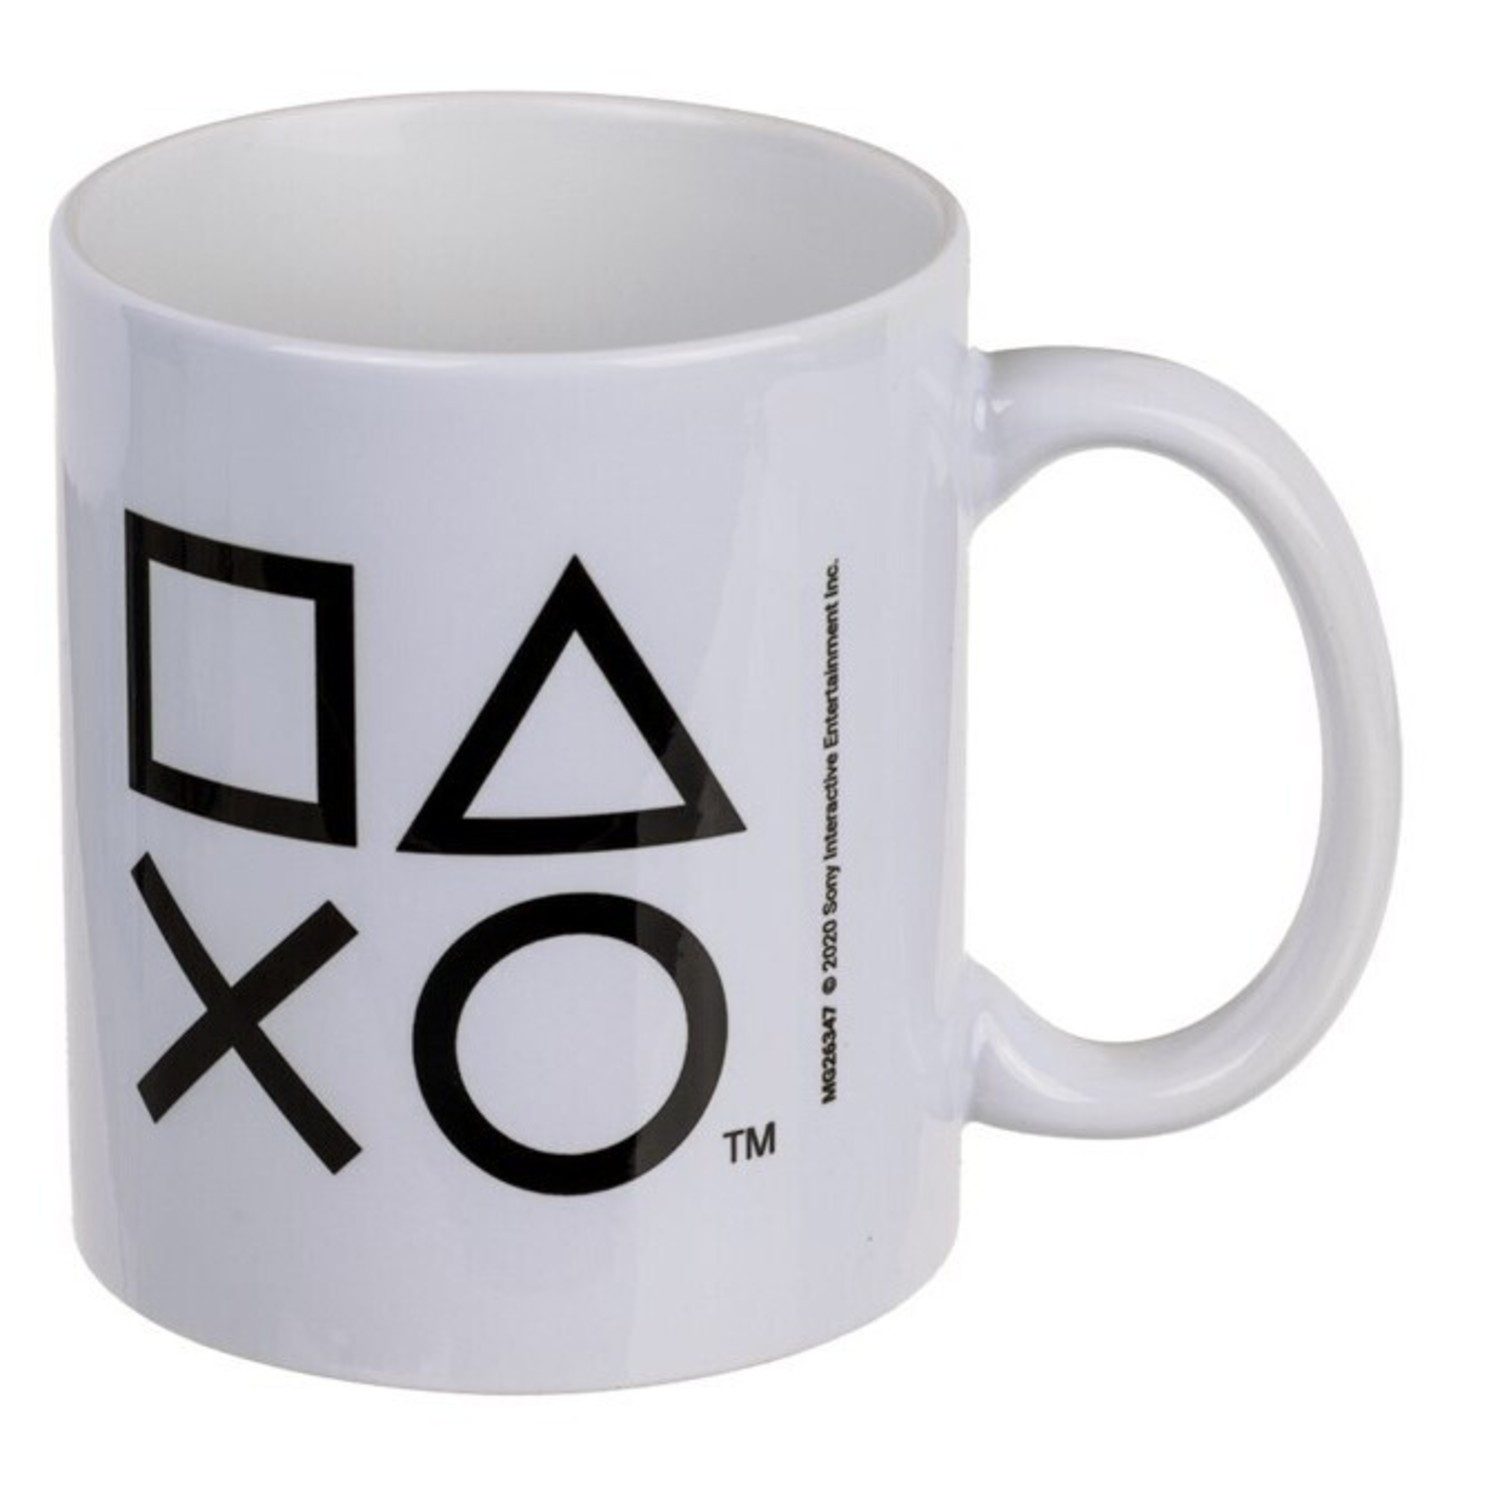 Out of the Blue Tasse PlayStation Icons Kaffeebecher